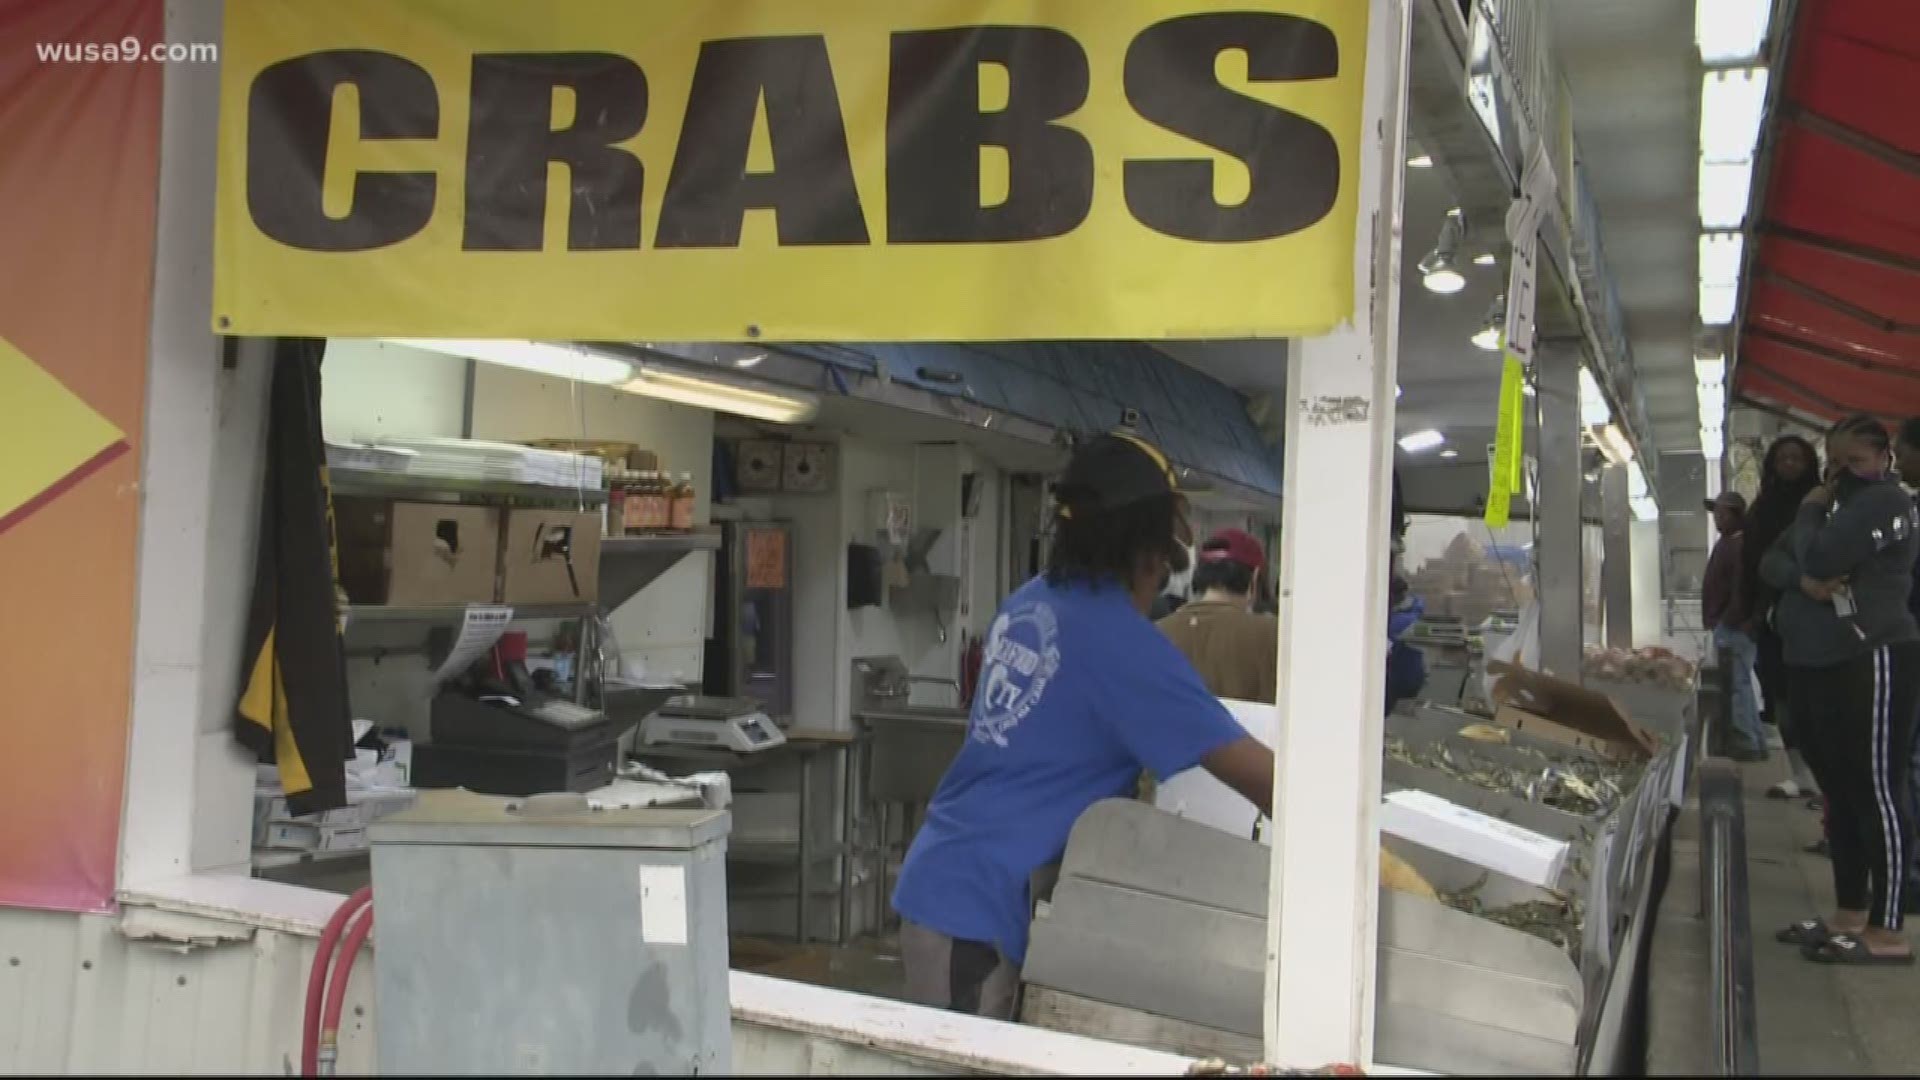 D.C. may be under a stay-at-home order due to the coronavirus, but many people were out on Saturday at the Wharf's fish markets, and they were not social distancing.